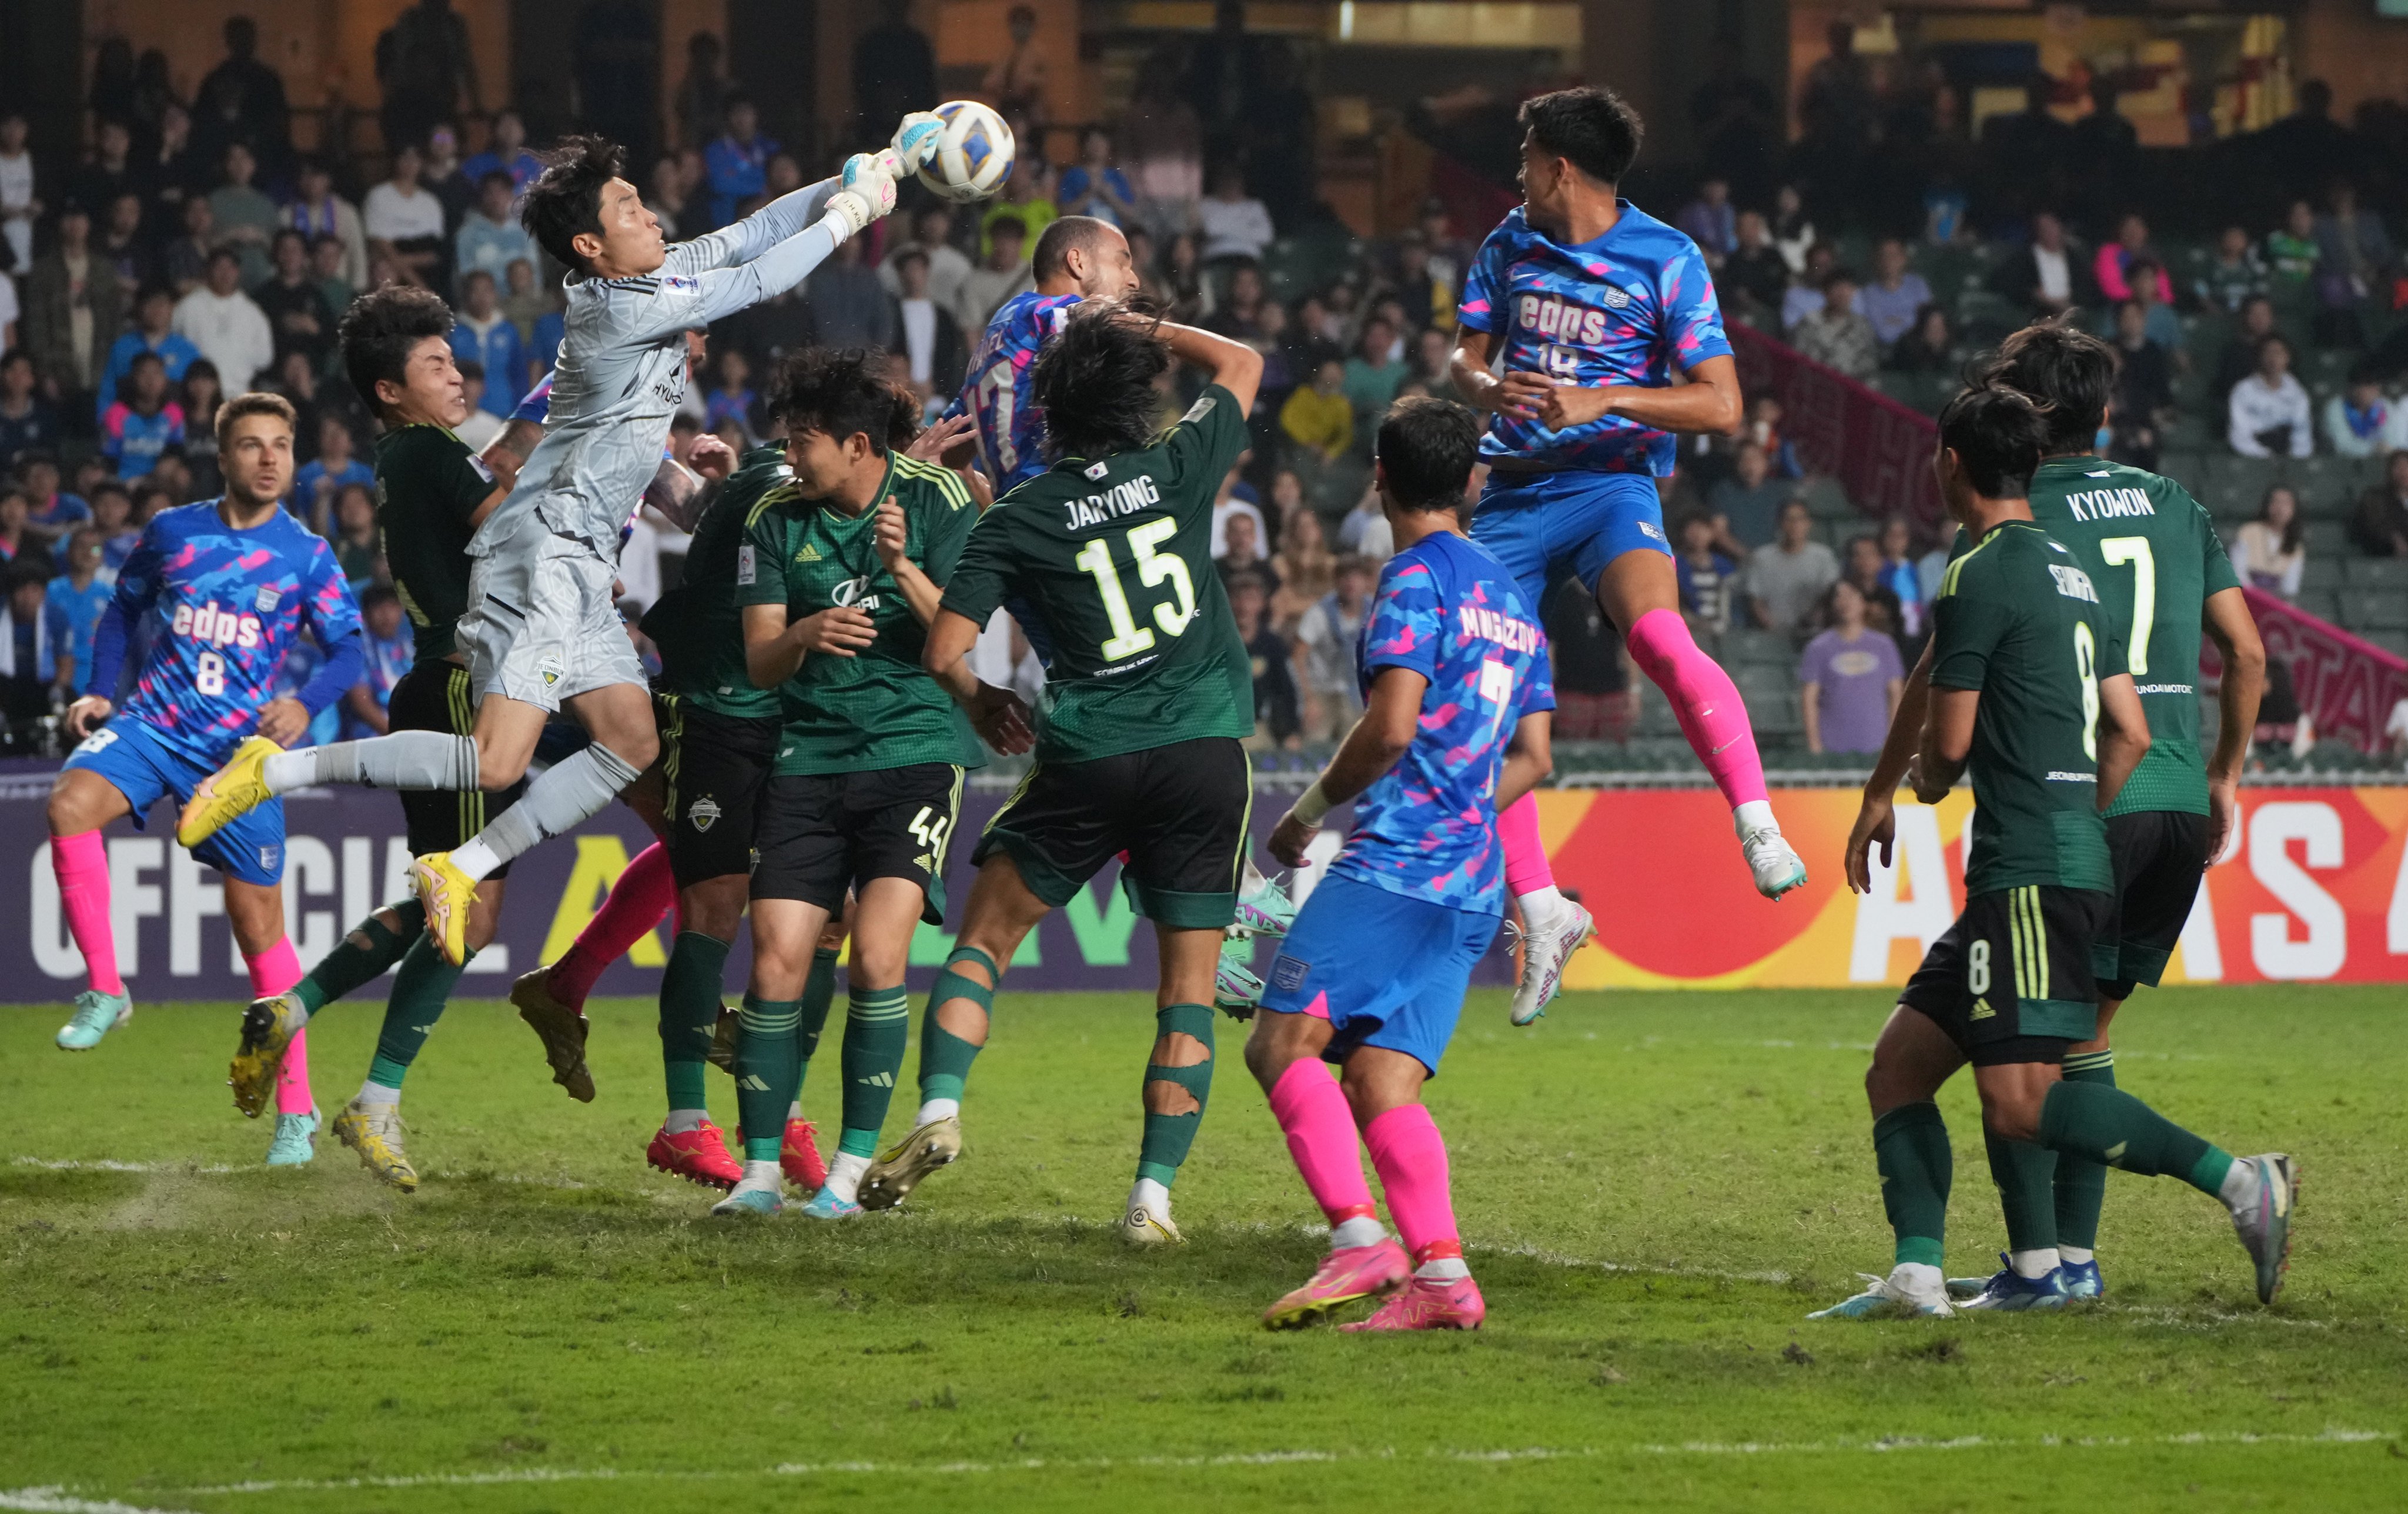 Jeonbuk Hyundai Motors’s goalkeeper Kim Jeong-hoon in action during his side’s AFC Champions League match against Kitchee at Hong Kong Stadium. Kitchee are in danger of missing out on Asian football for the first time since 2011. Photo: Sam Tsang